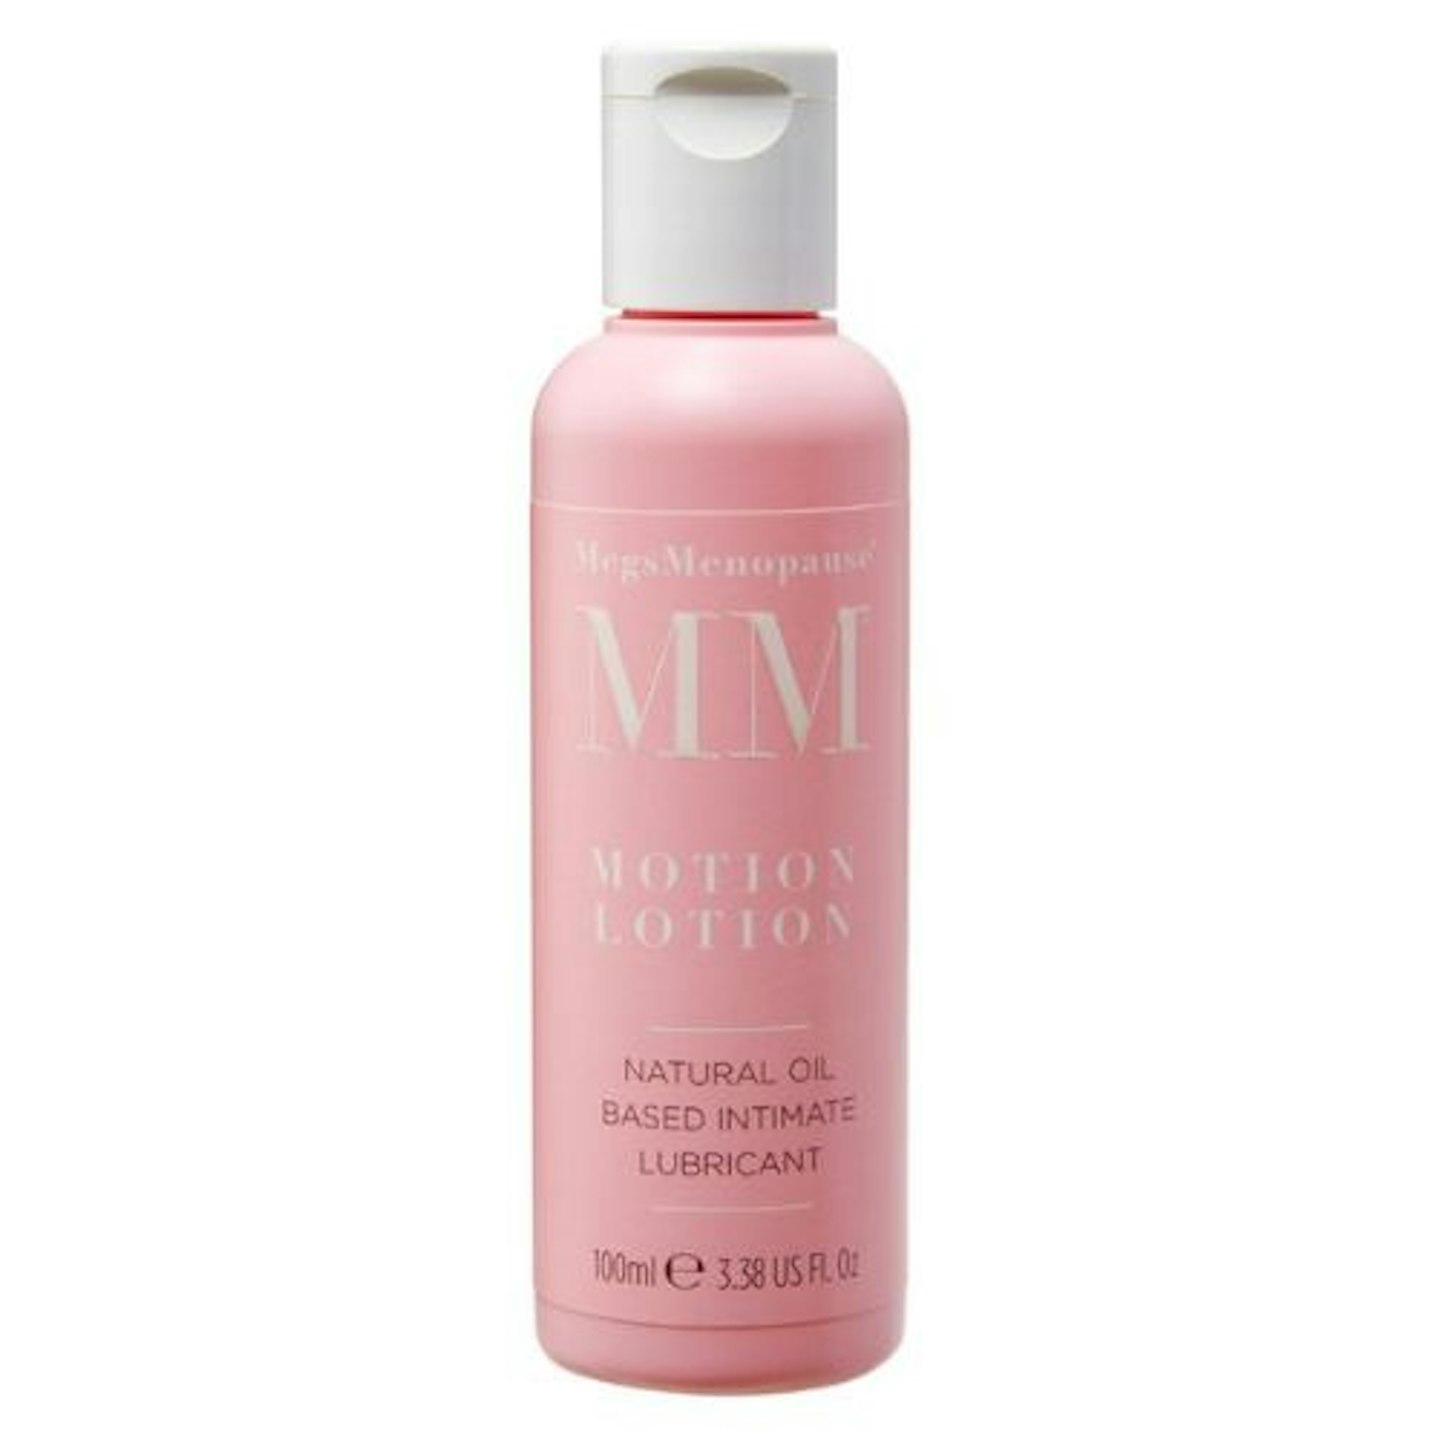 MegsMenopause Motion Lotion Natural Oil Based Intimate Lubricant